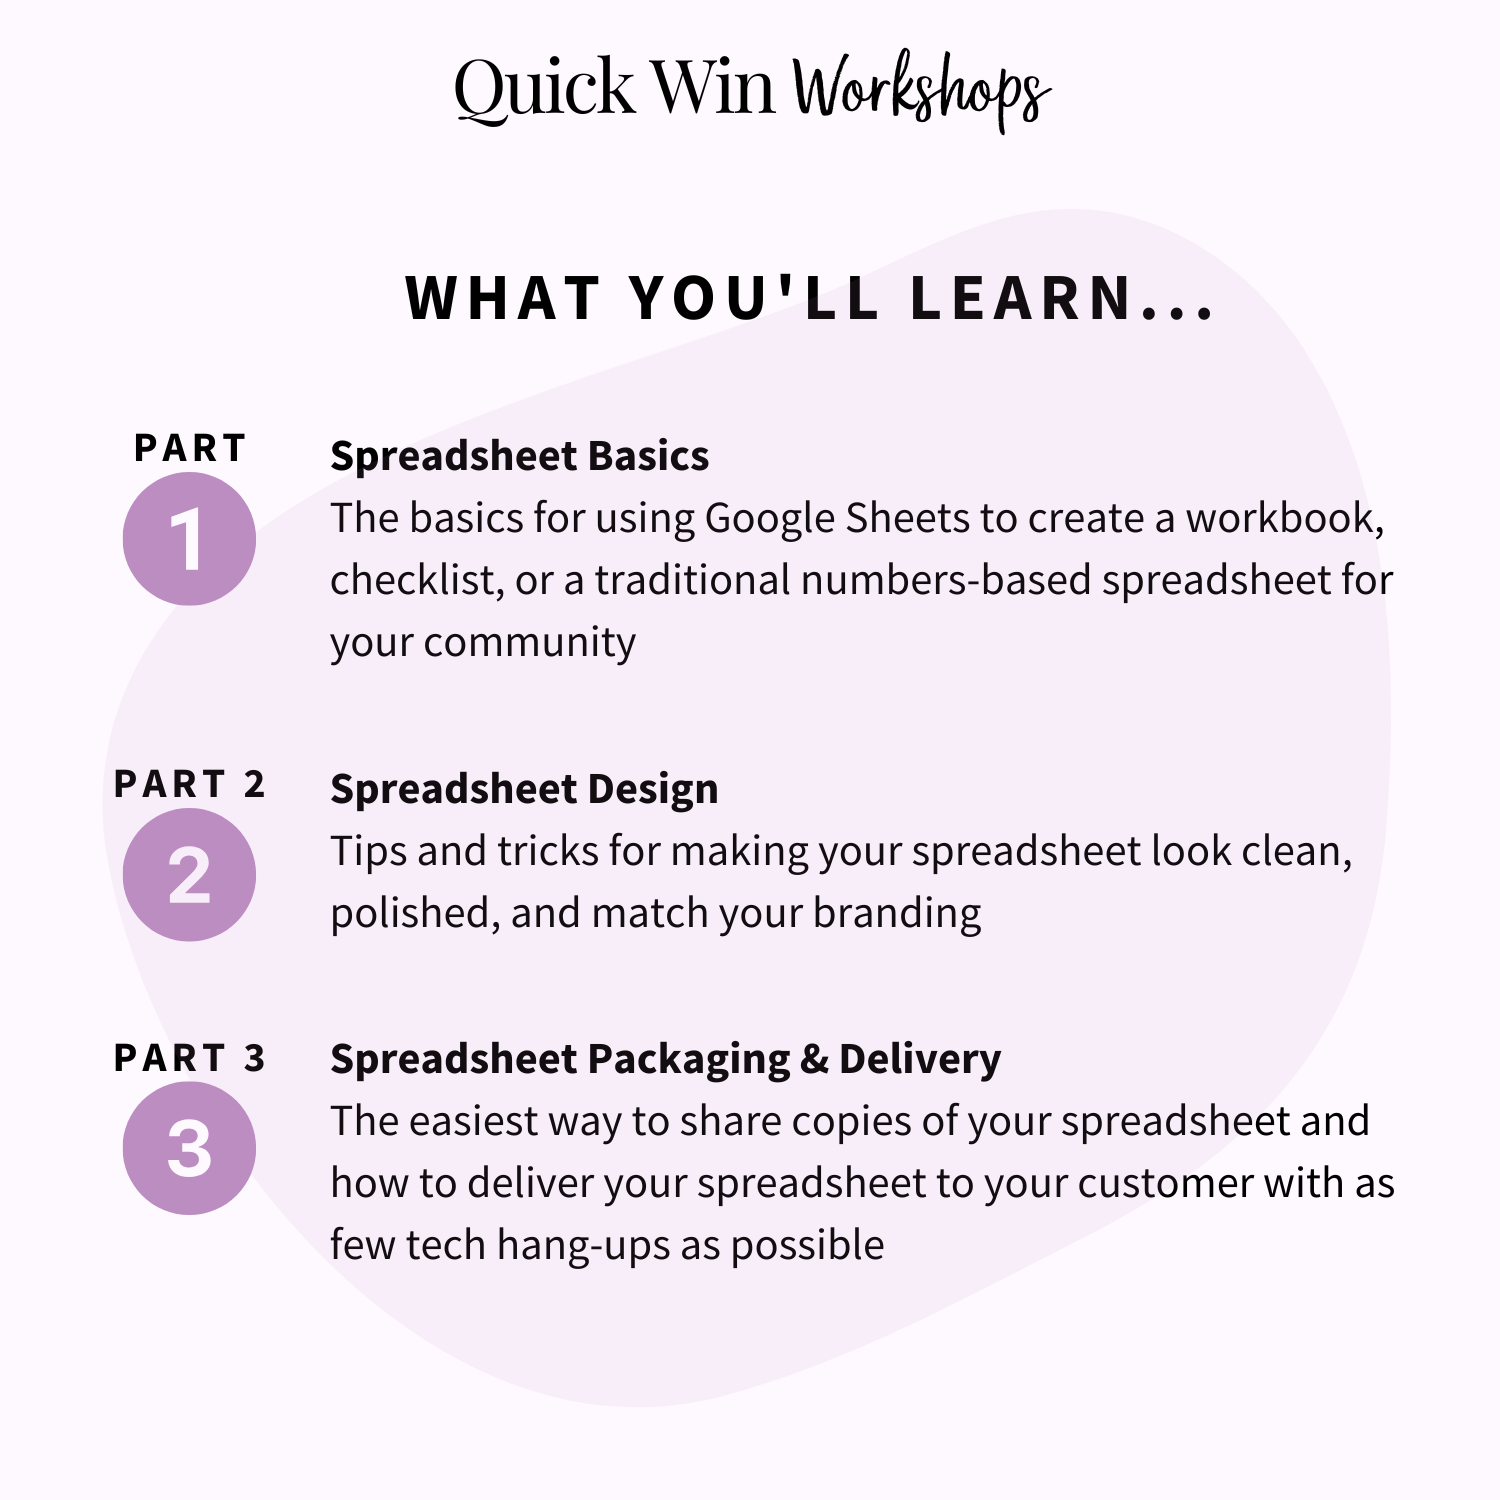 What you'll learn in the Quick Win Workshop: How to Create and Package a Spreadsheet to Sell as a Digital Product